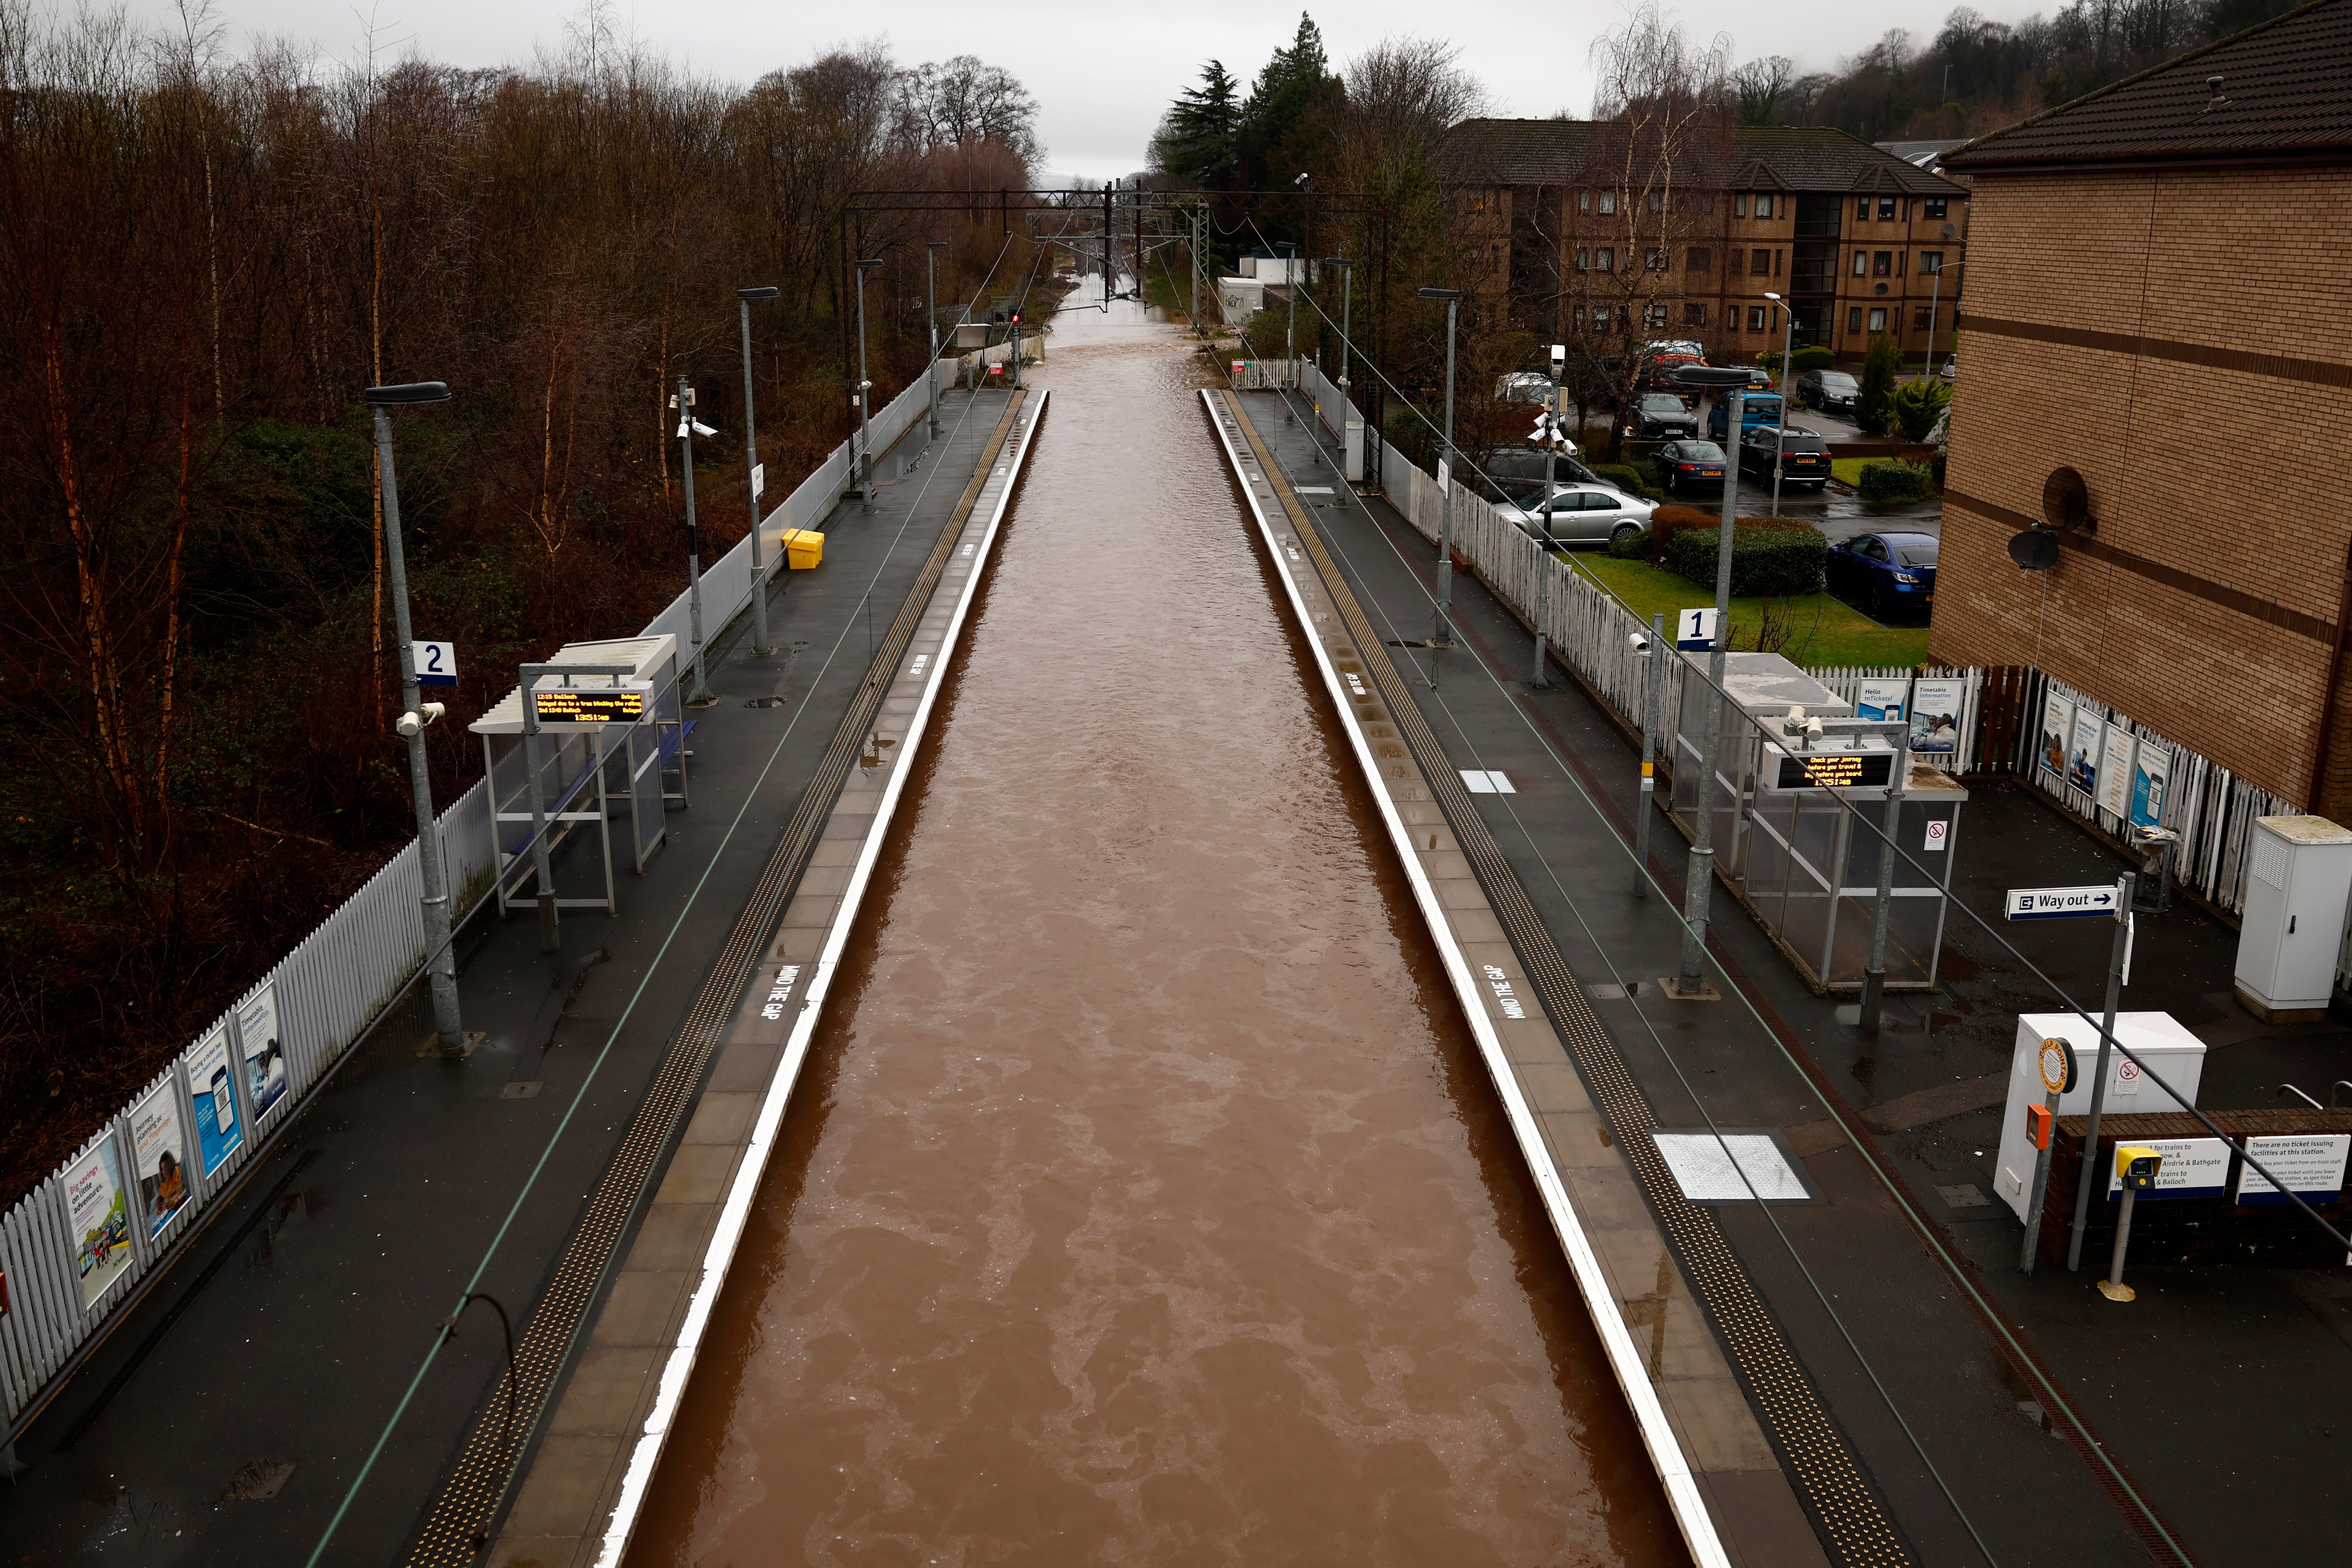 The tracks at Bowling train station were completely submerged by floodwaters